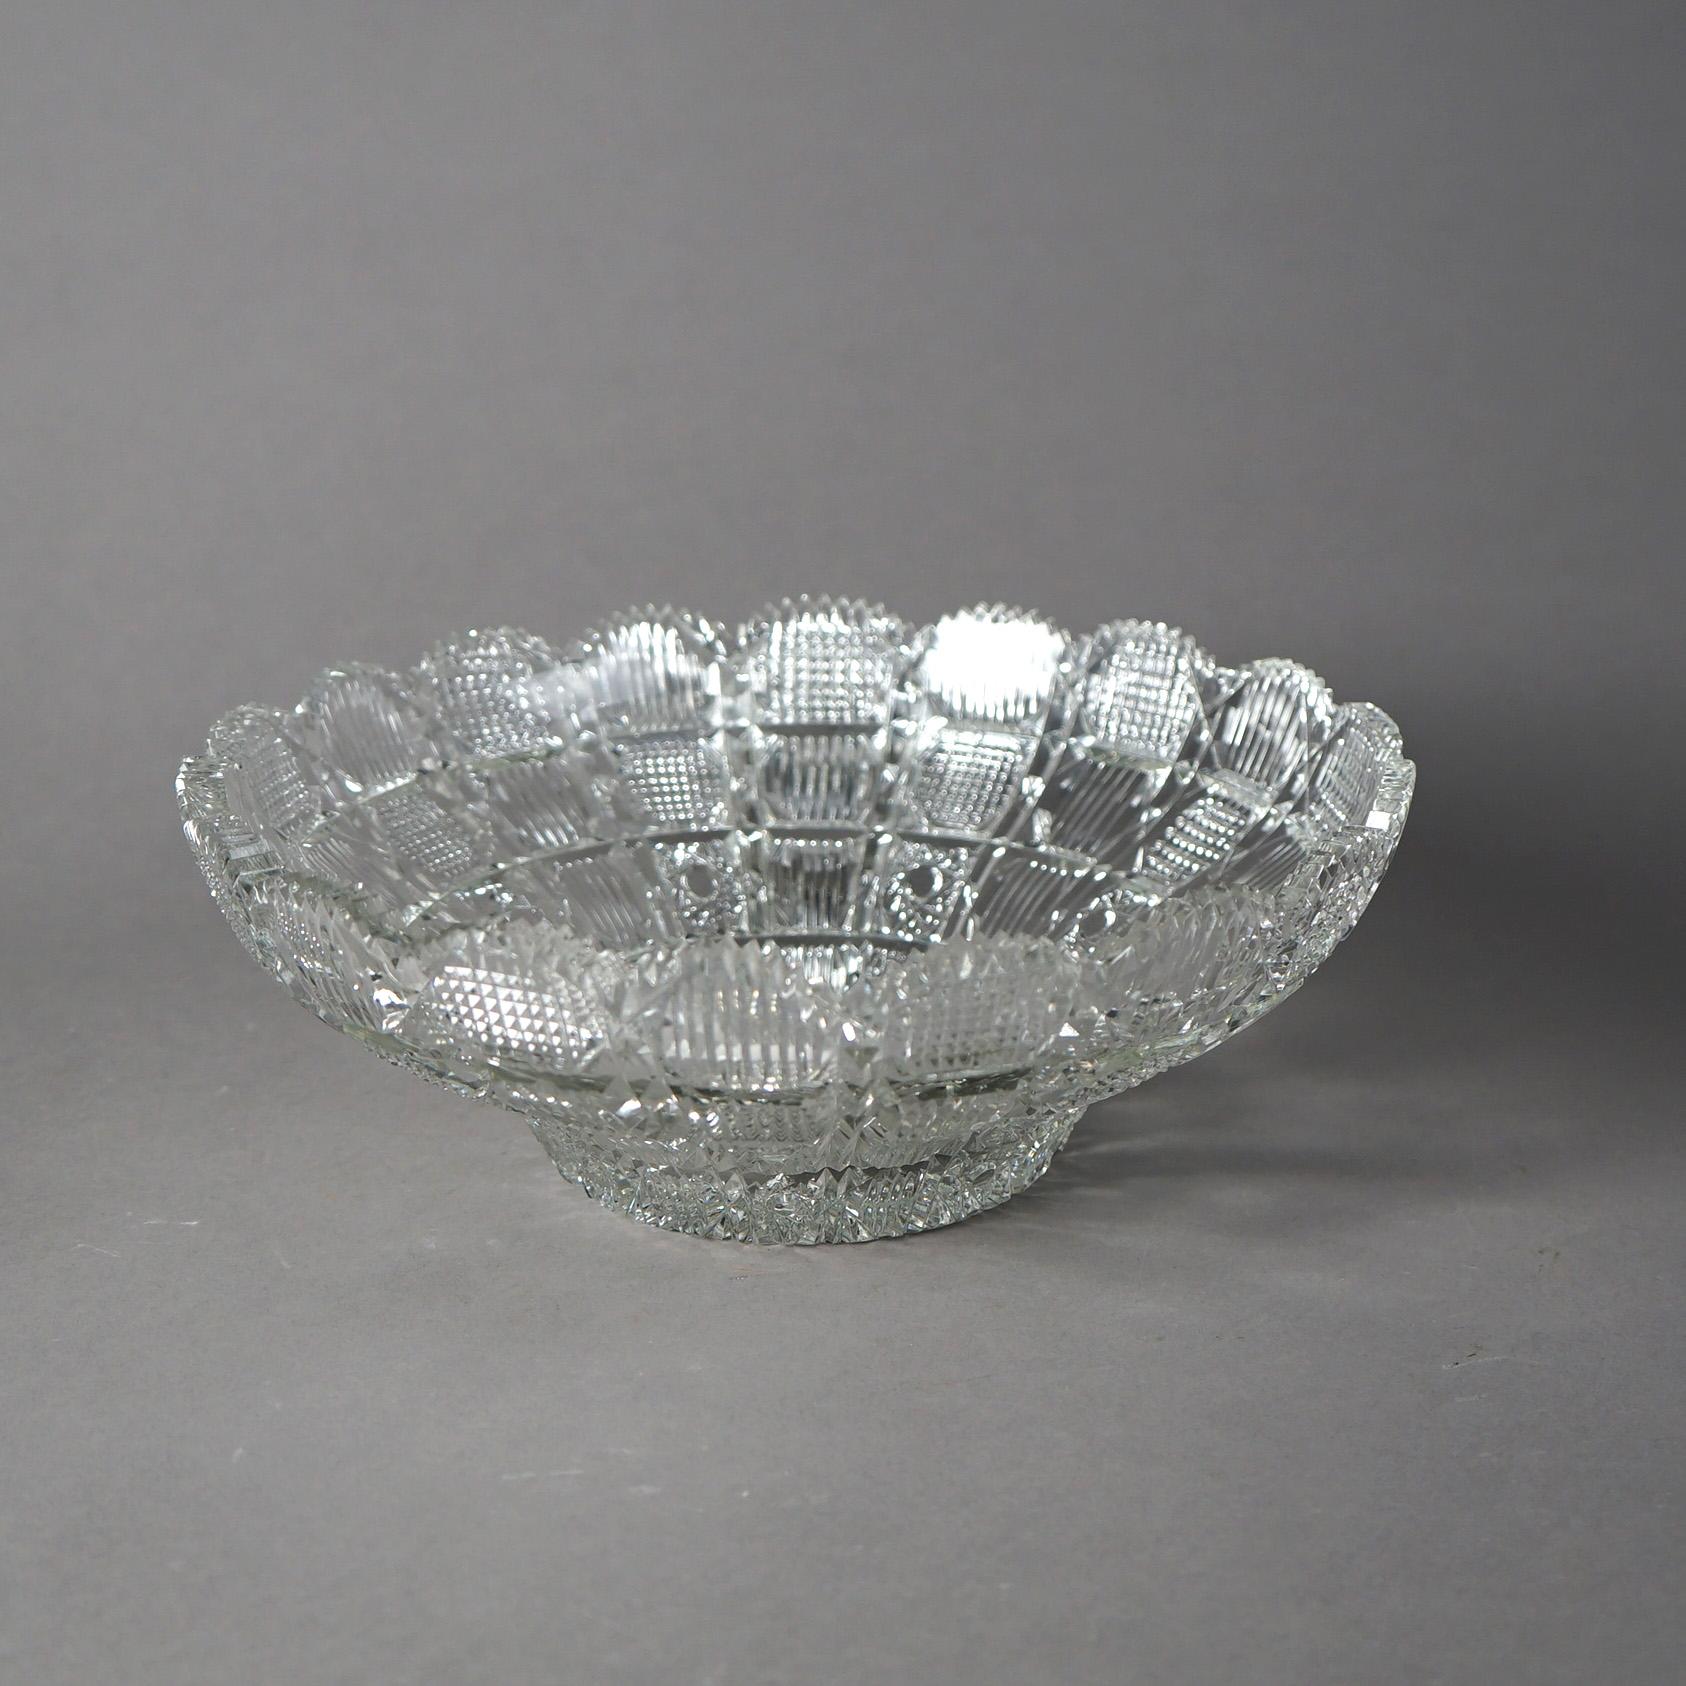 An antique brilliant cut glass bowl in the manner of Hawkes c1900

Measures - 4.25